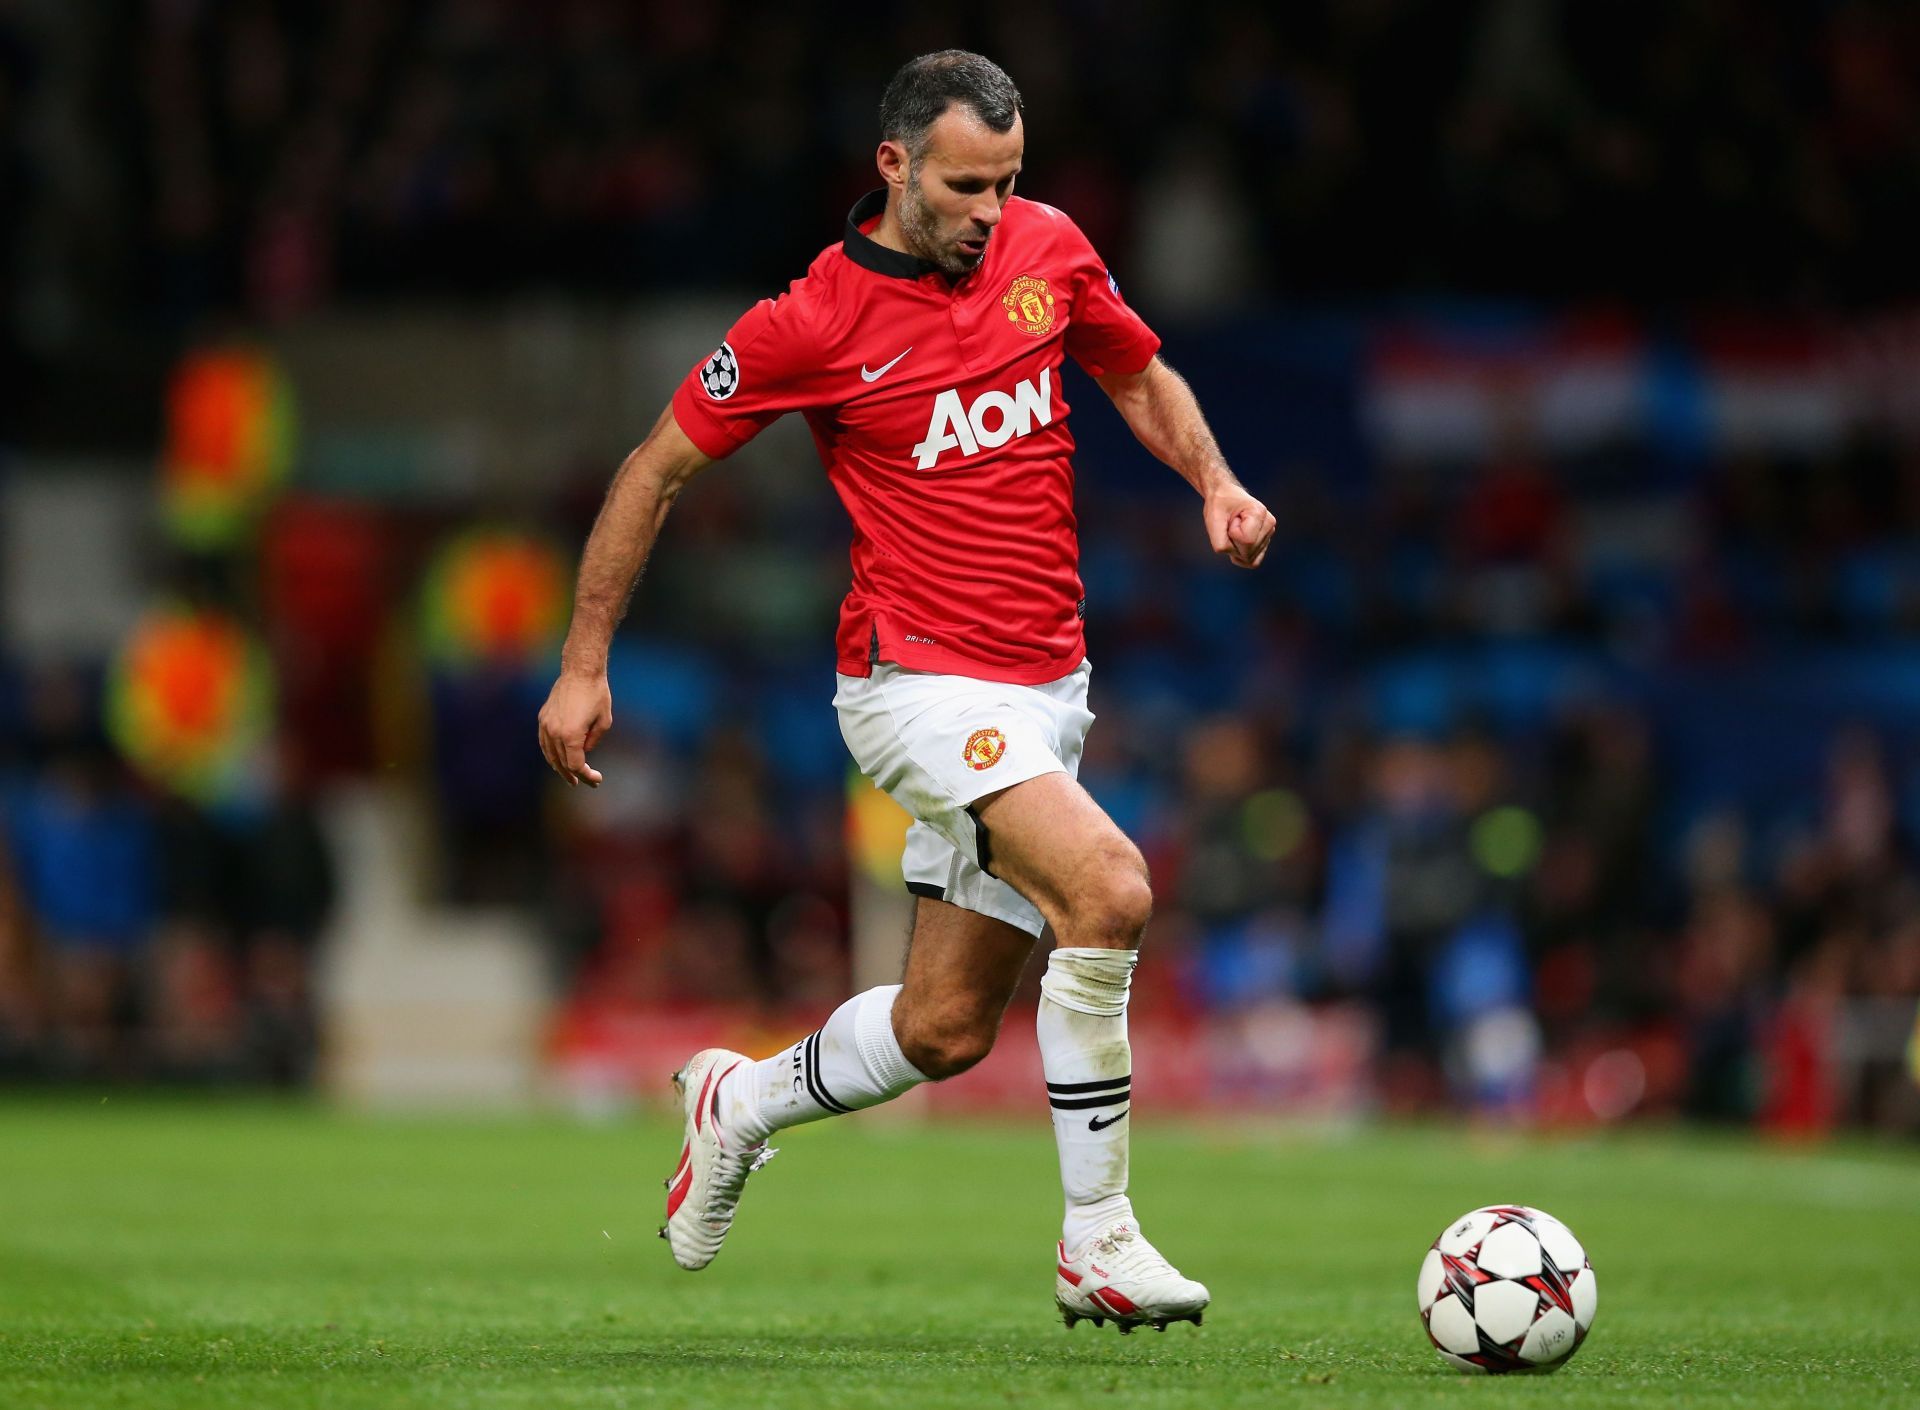 Ryan Giggs played his entire career at Manchester United.